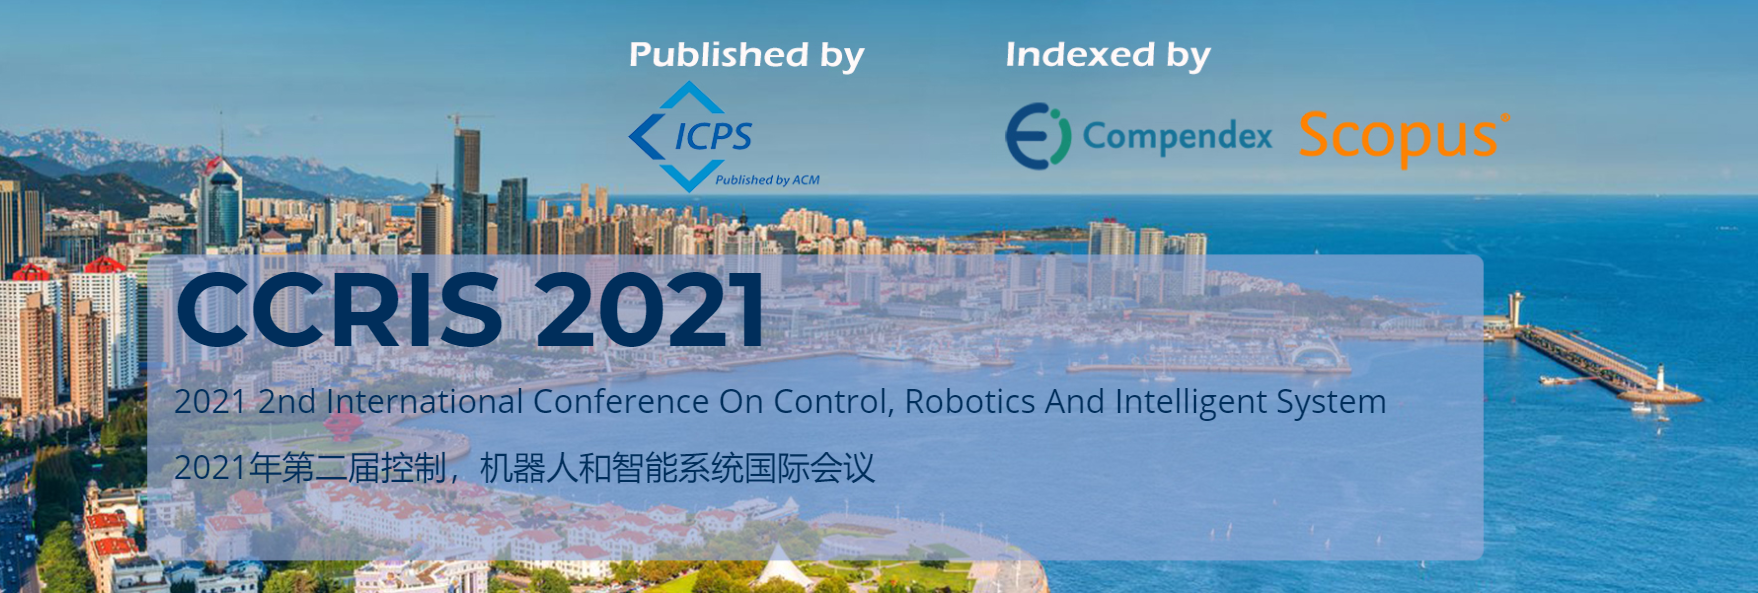 2021 2nd International Conference on Control, Robotics and Intelligent System (CCRIS 2021), Qingdao, Shandong, China